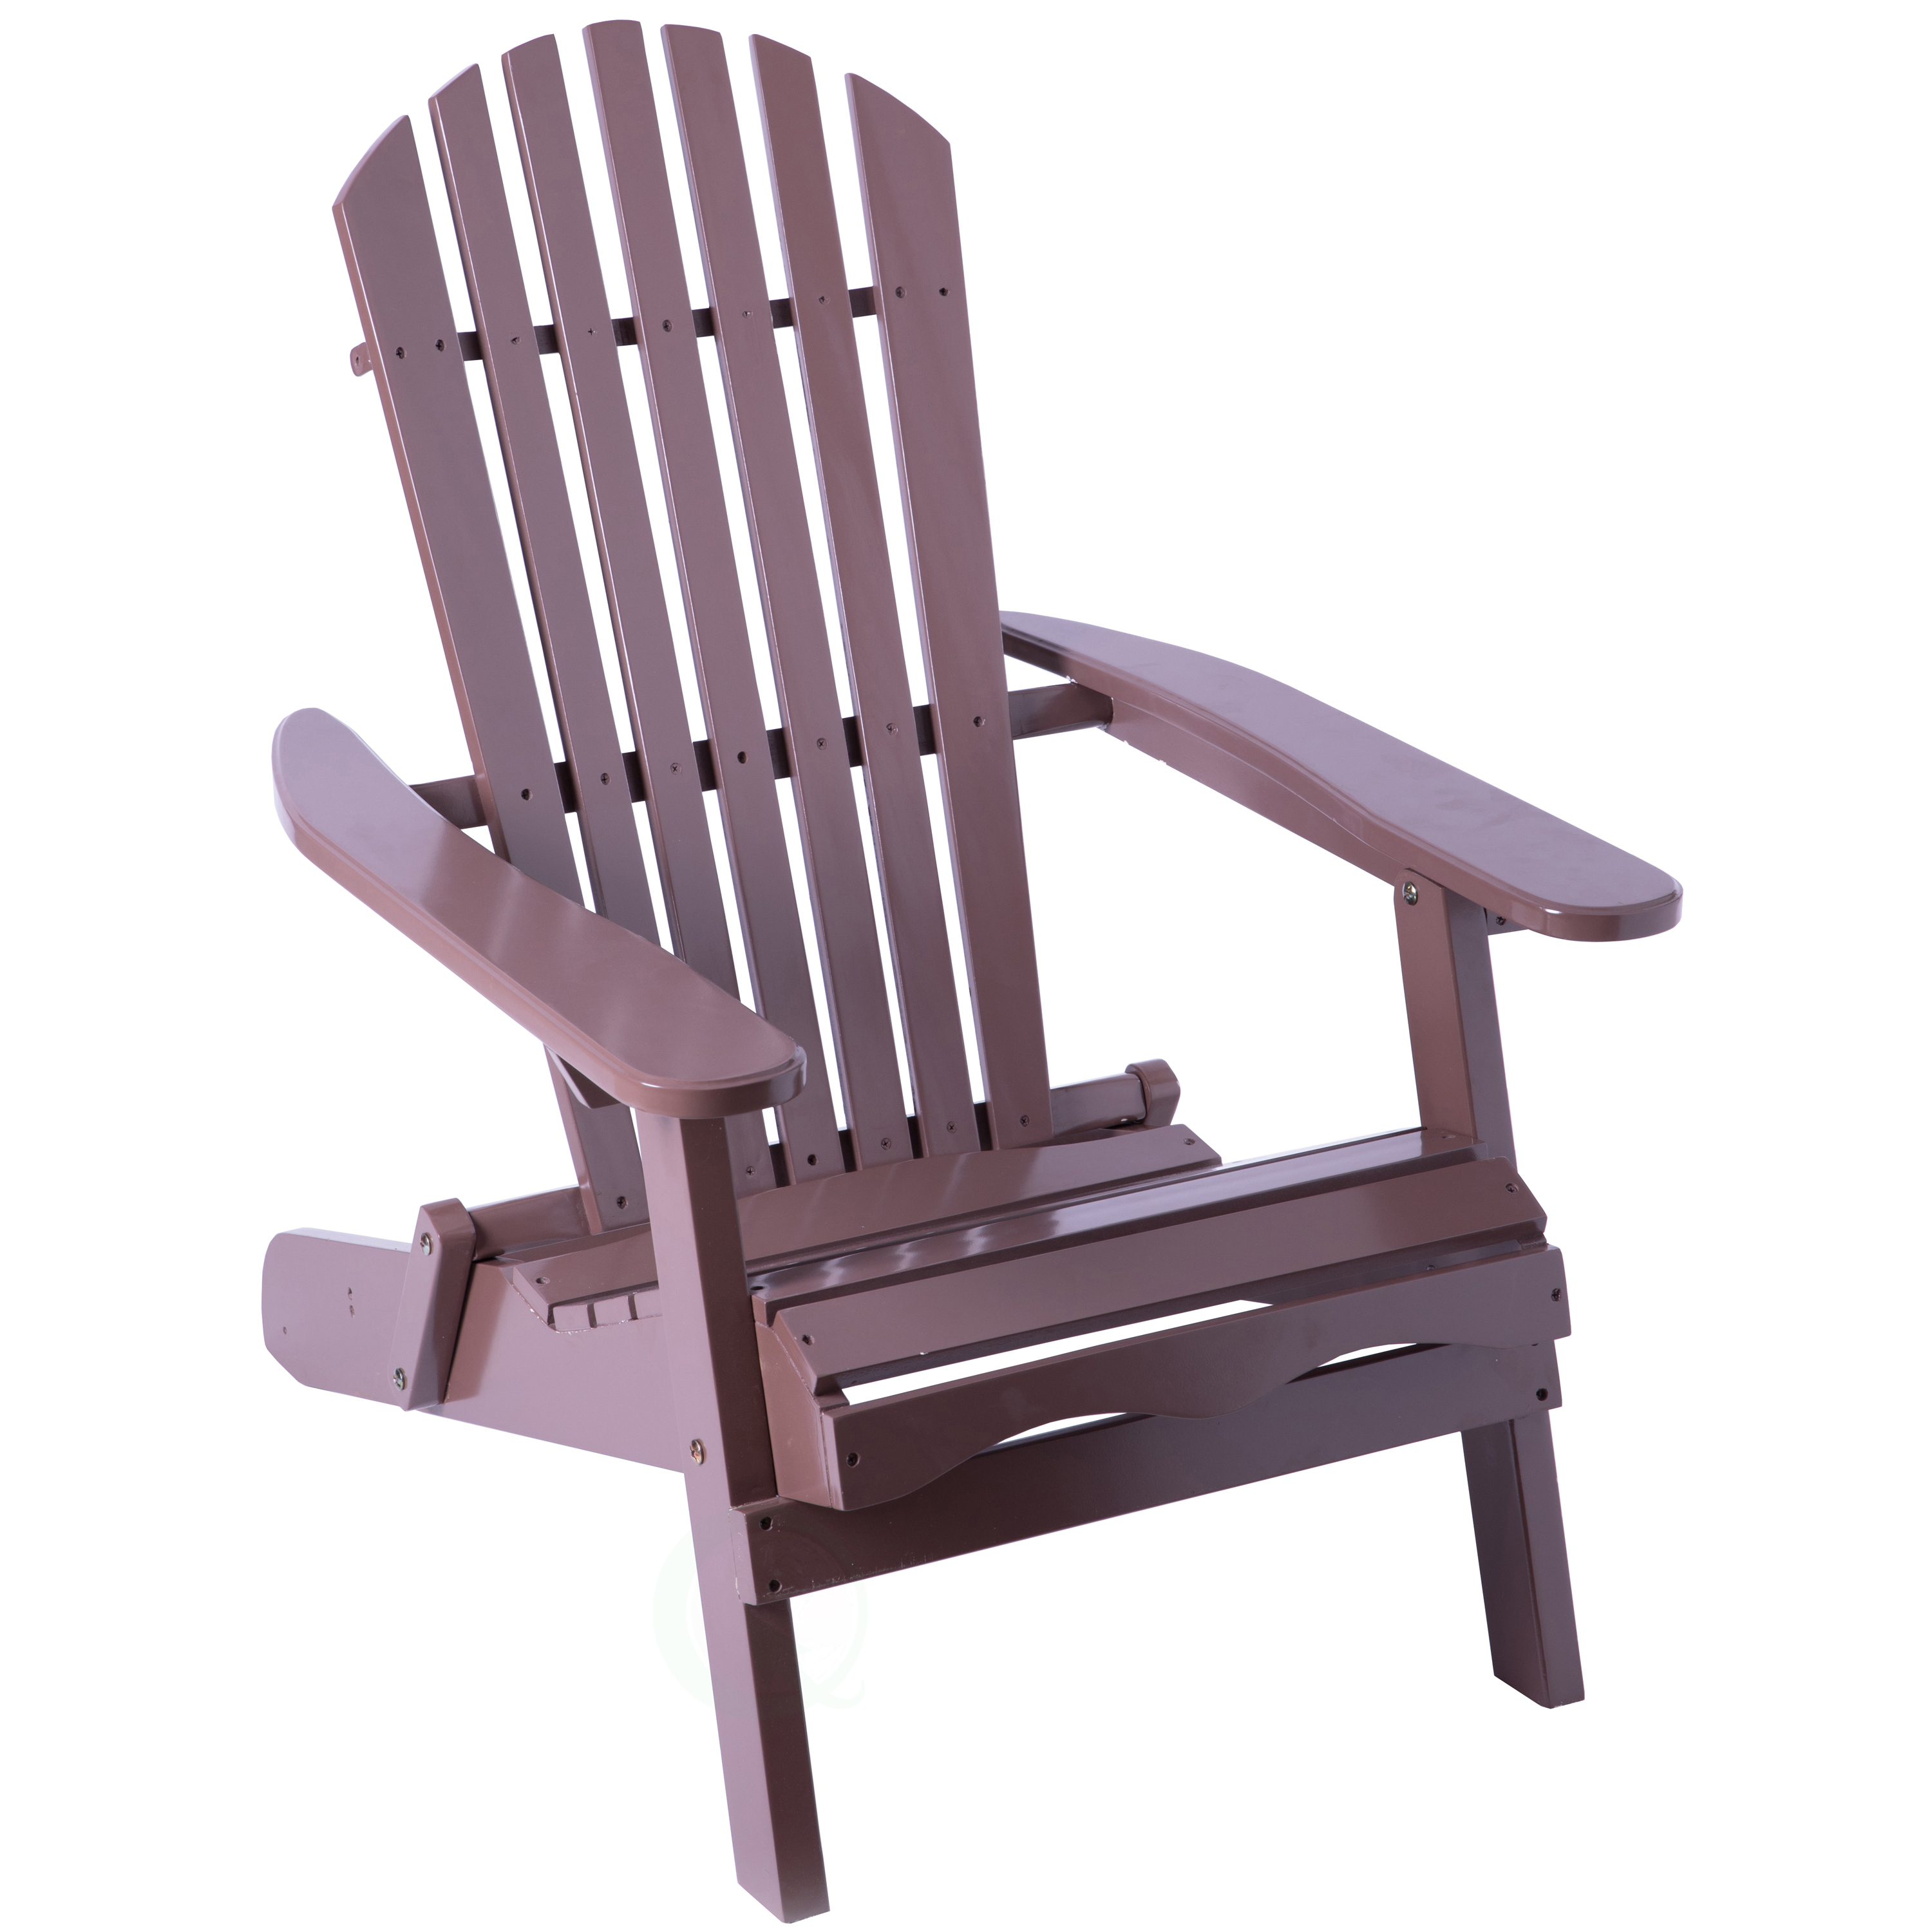 Foldable Adirondack Outdoor Wooden Patio Deck Garden Lounge Chair, Brown - image 1 of 6